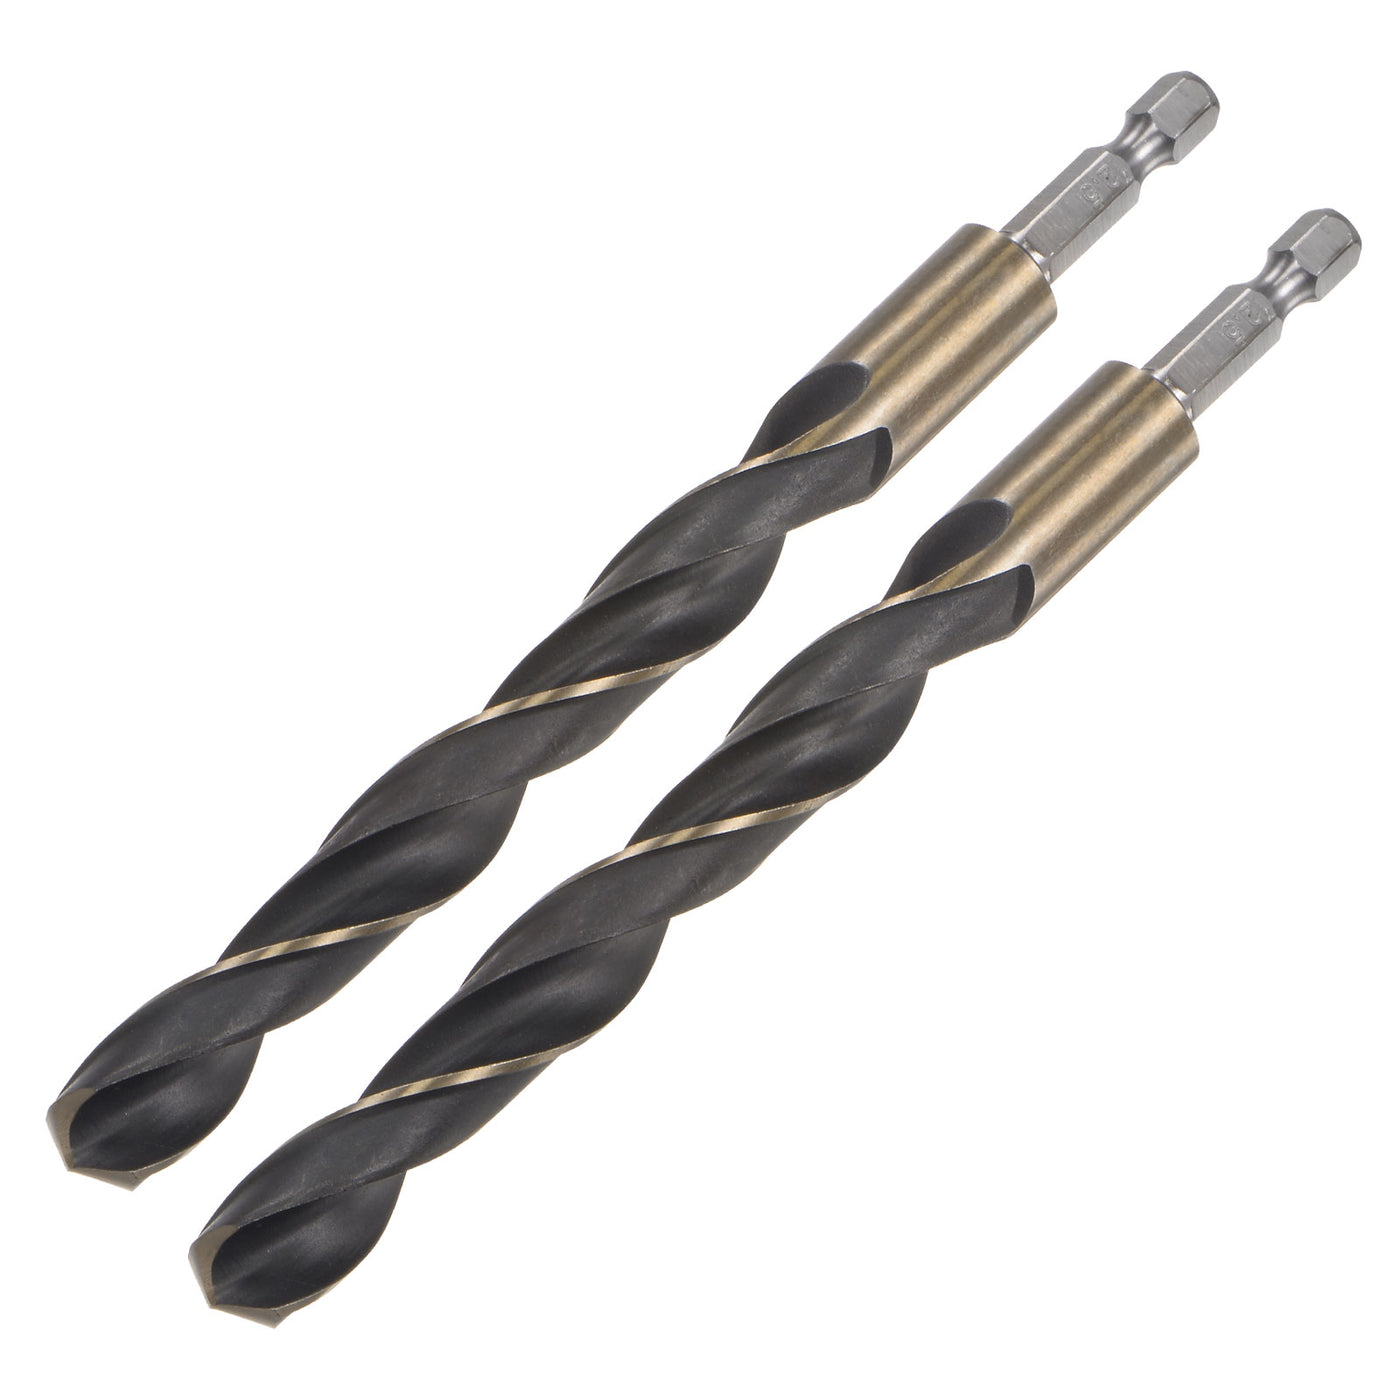 uxcell Uxcell 2Pcs 12.5mm High Speed Steel Twist Drill Bit with Hex Shank 150mm Length